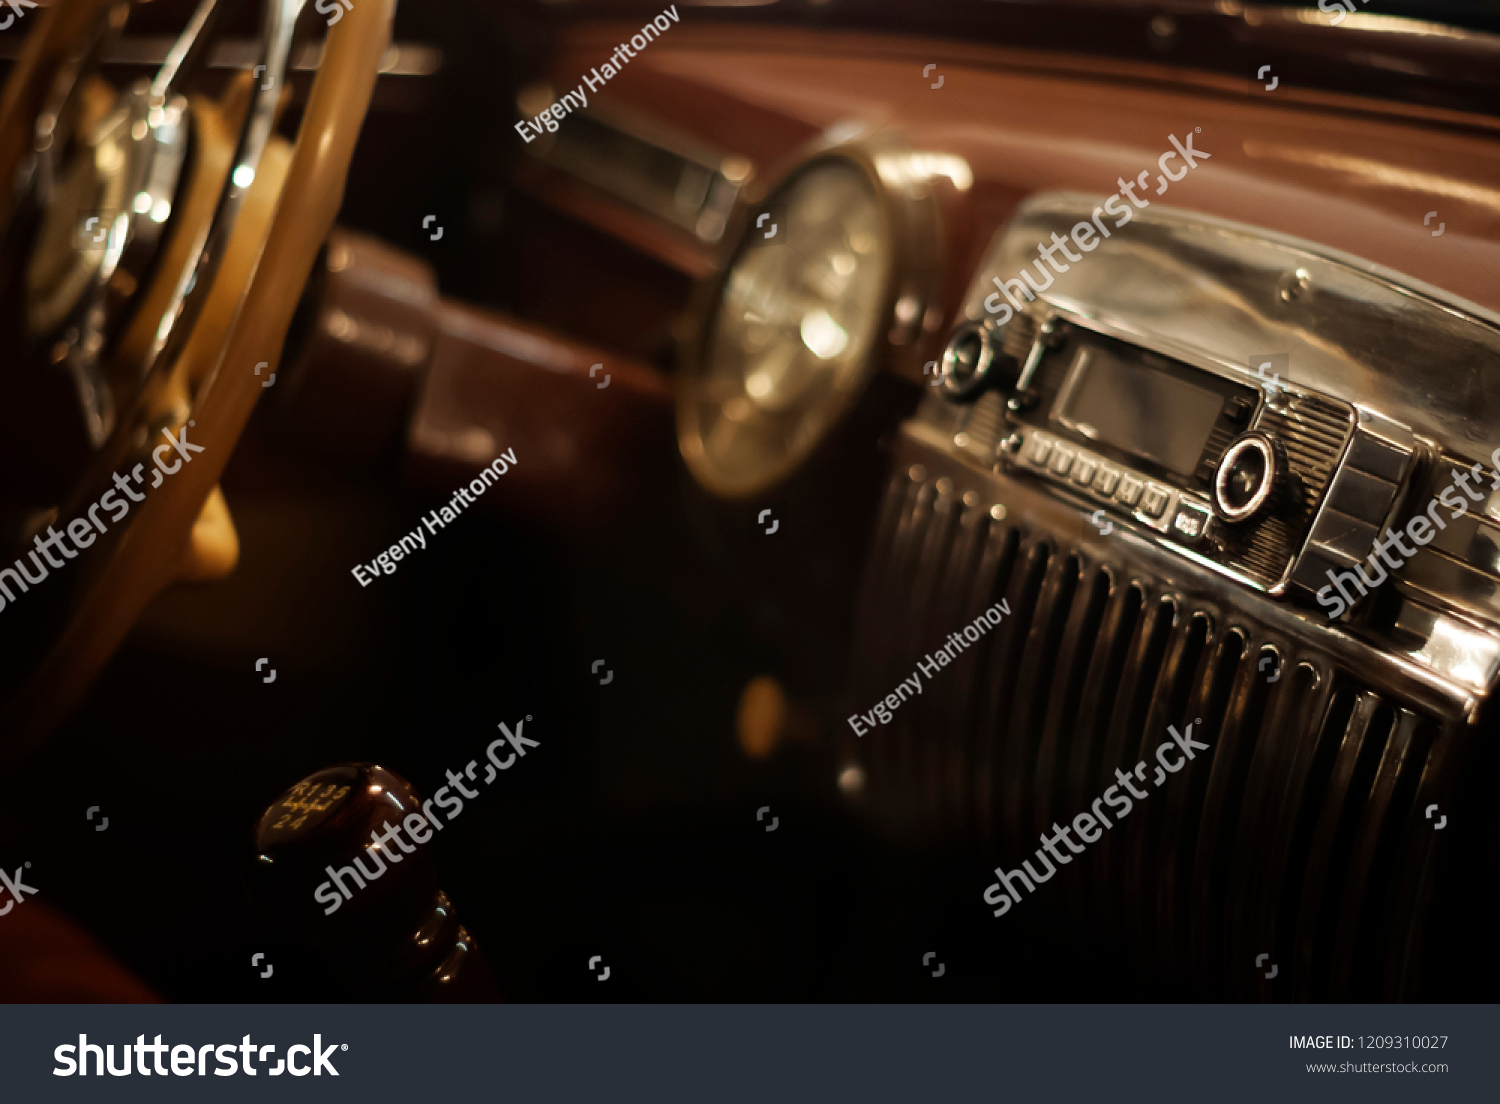 Blurred warm background - a fragment of the interior of a vintage car, focus on the handle of the radio #1209310027